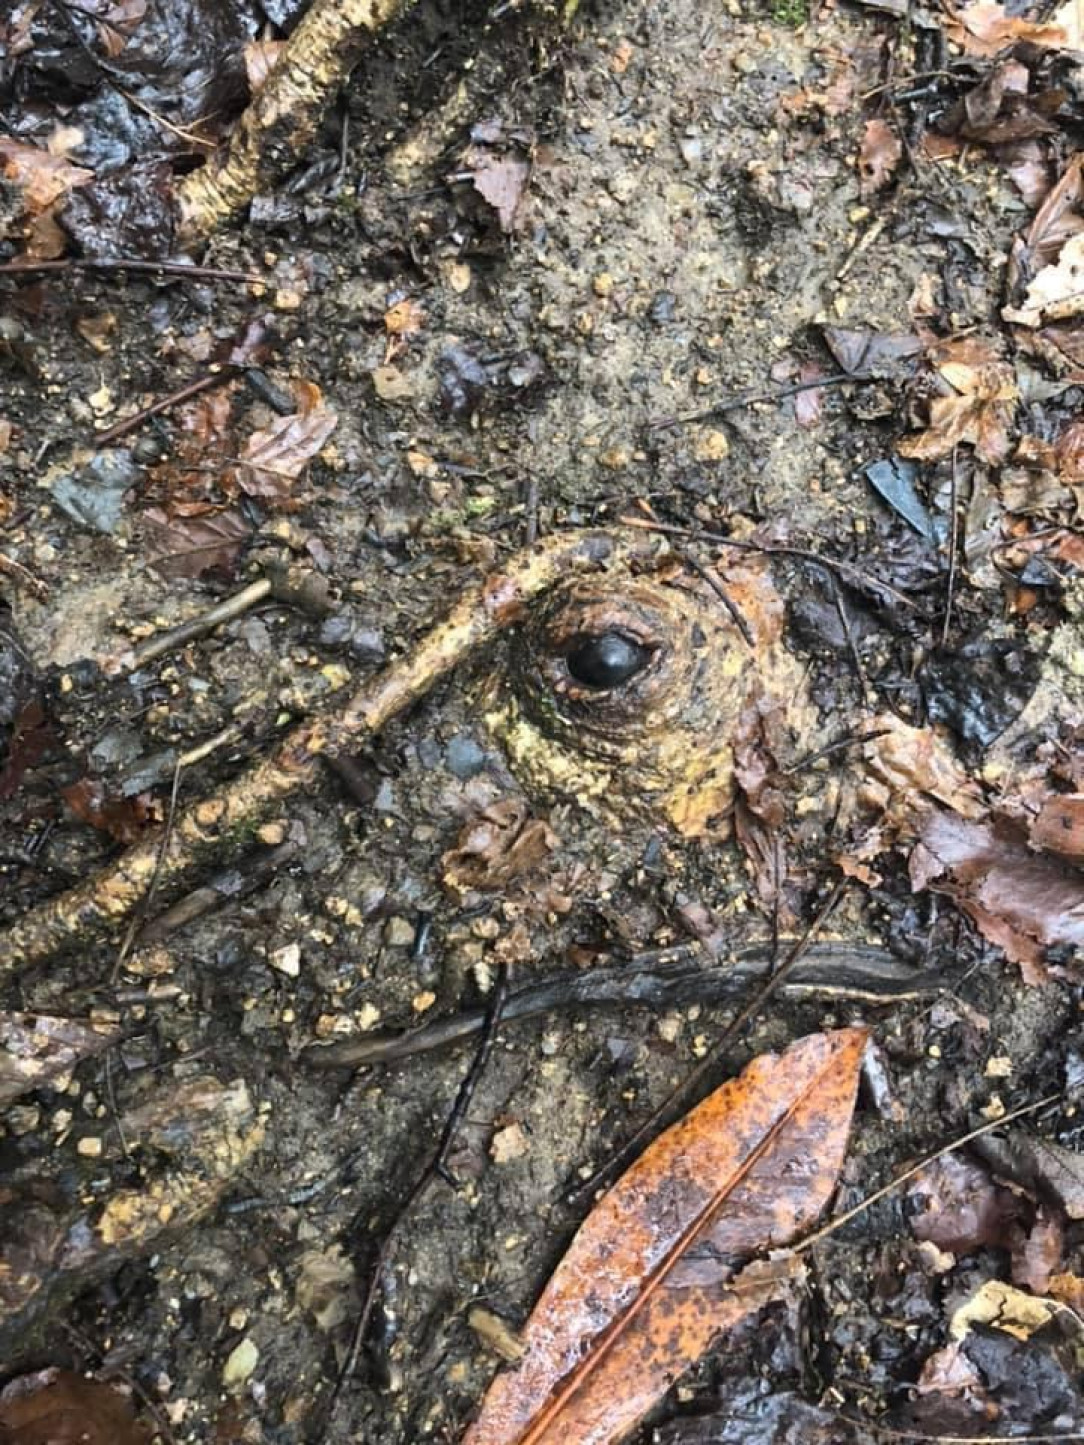 This tree root on the ground looks like an eye